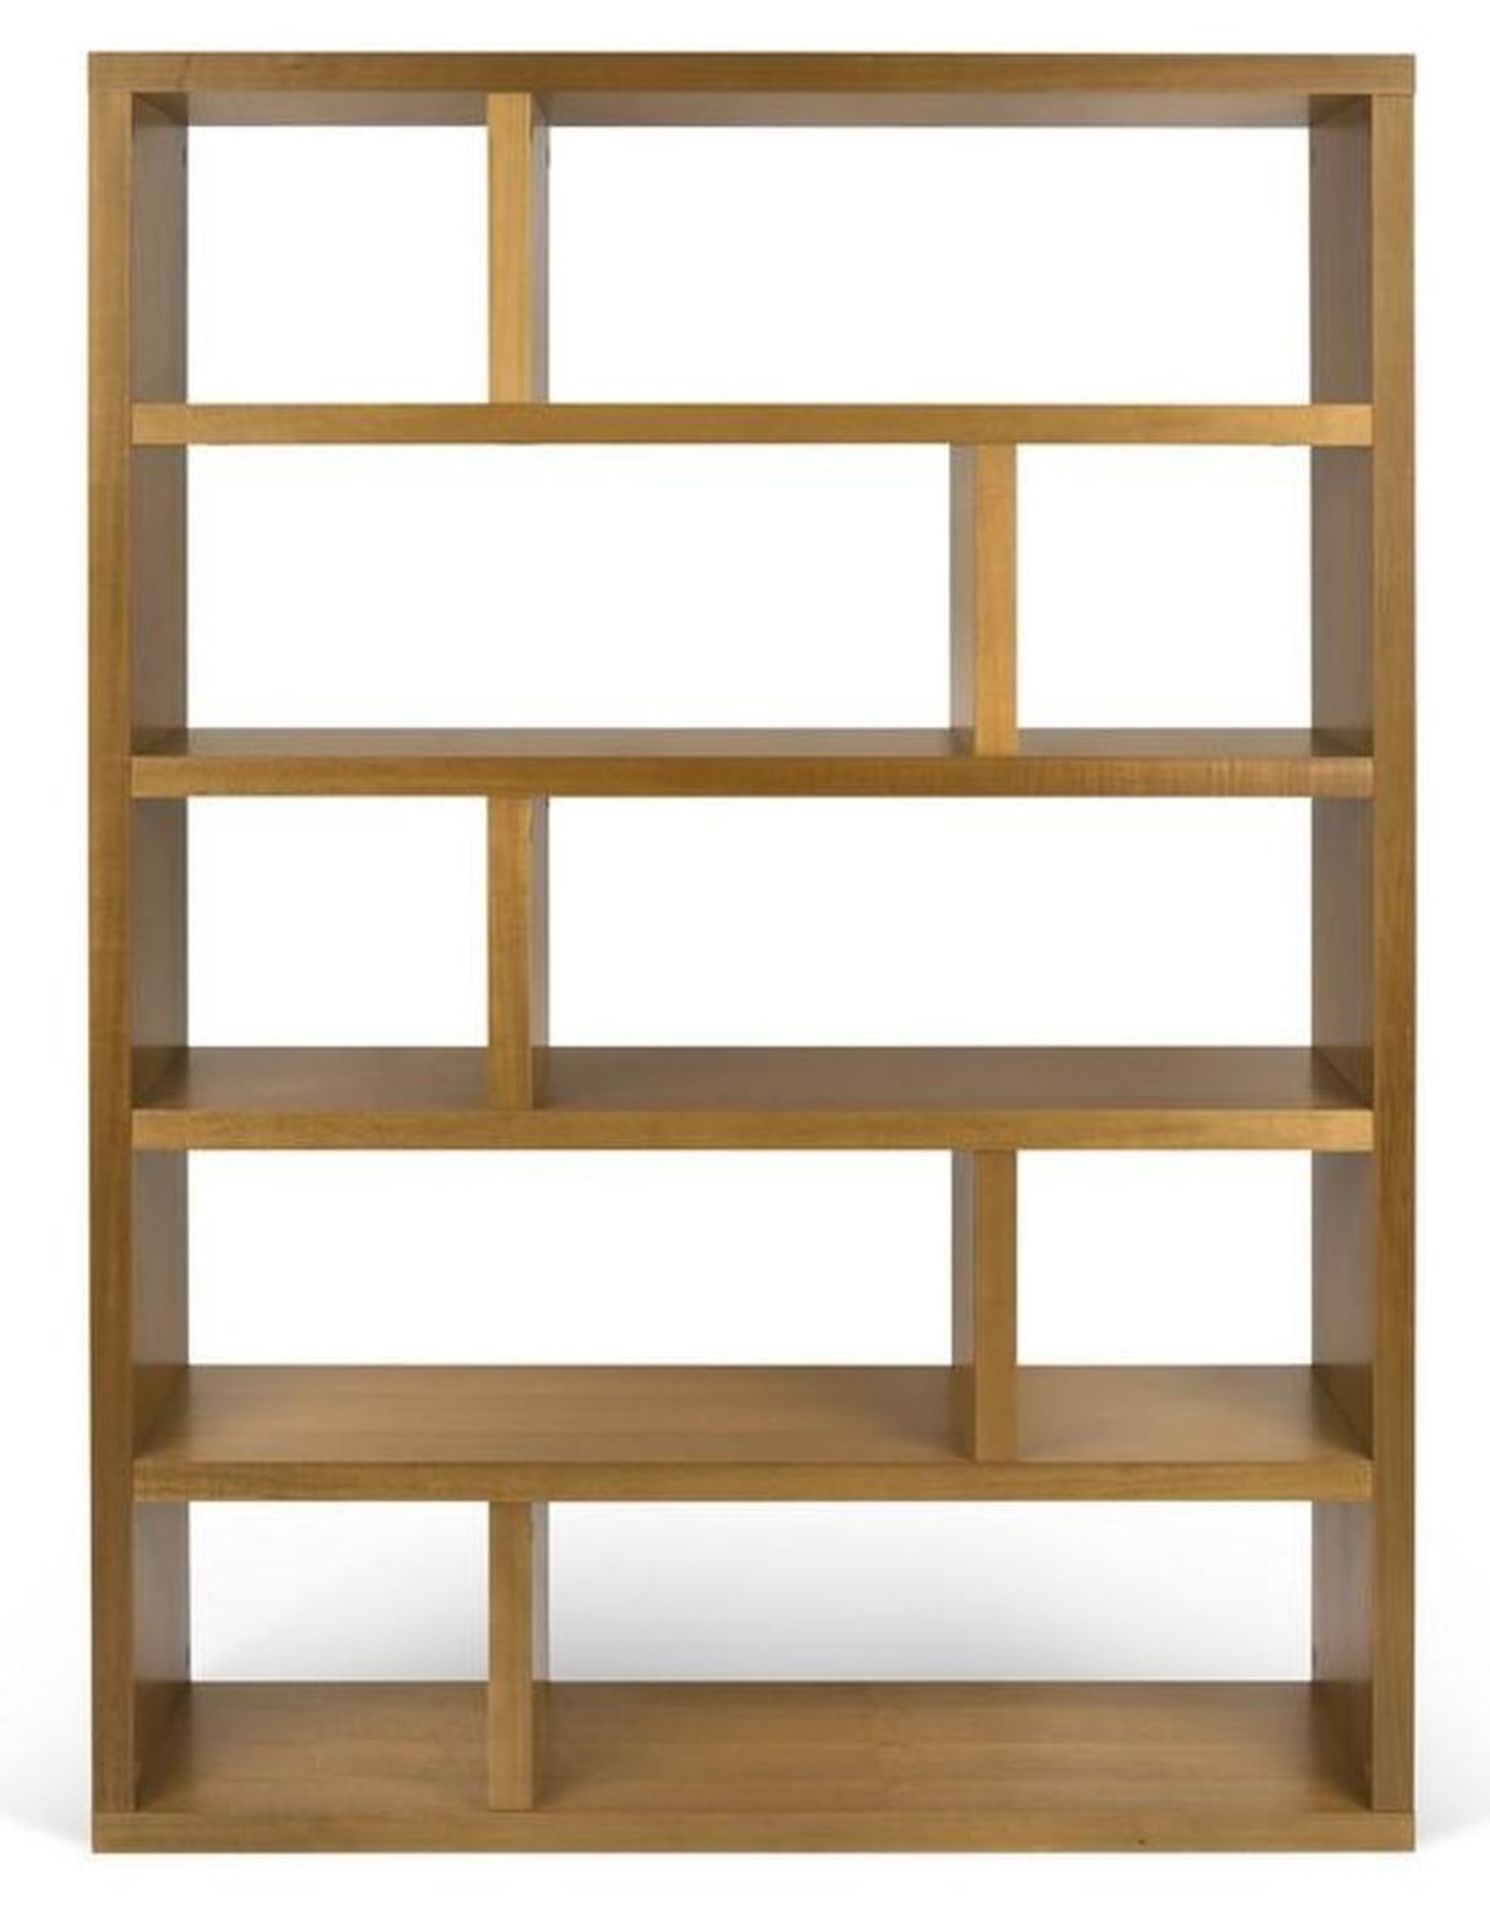 1 x Comtempoary High Shelving Unit - Mukali - Dimensions: 47W x 11D x 68H Inches - New Boxed Stock - Image 2 of 3